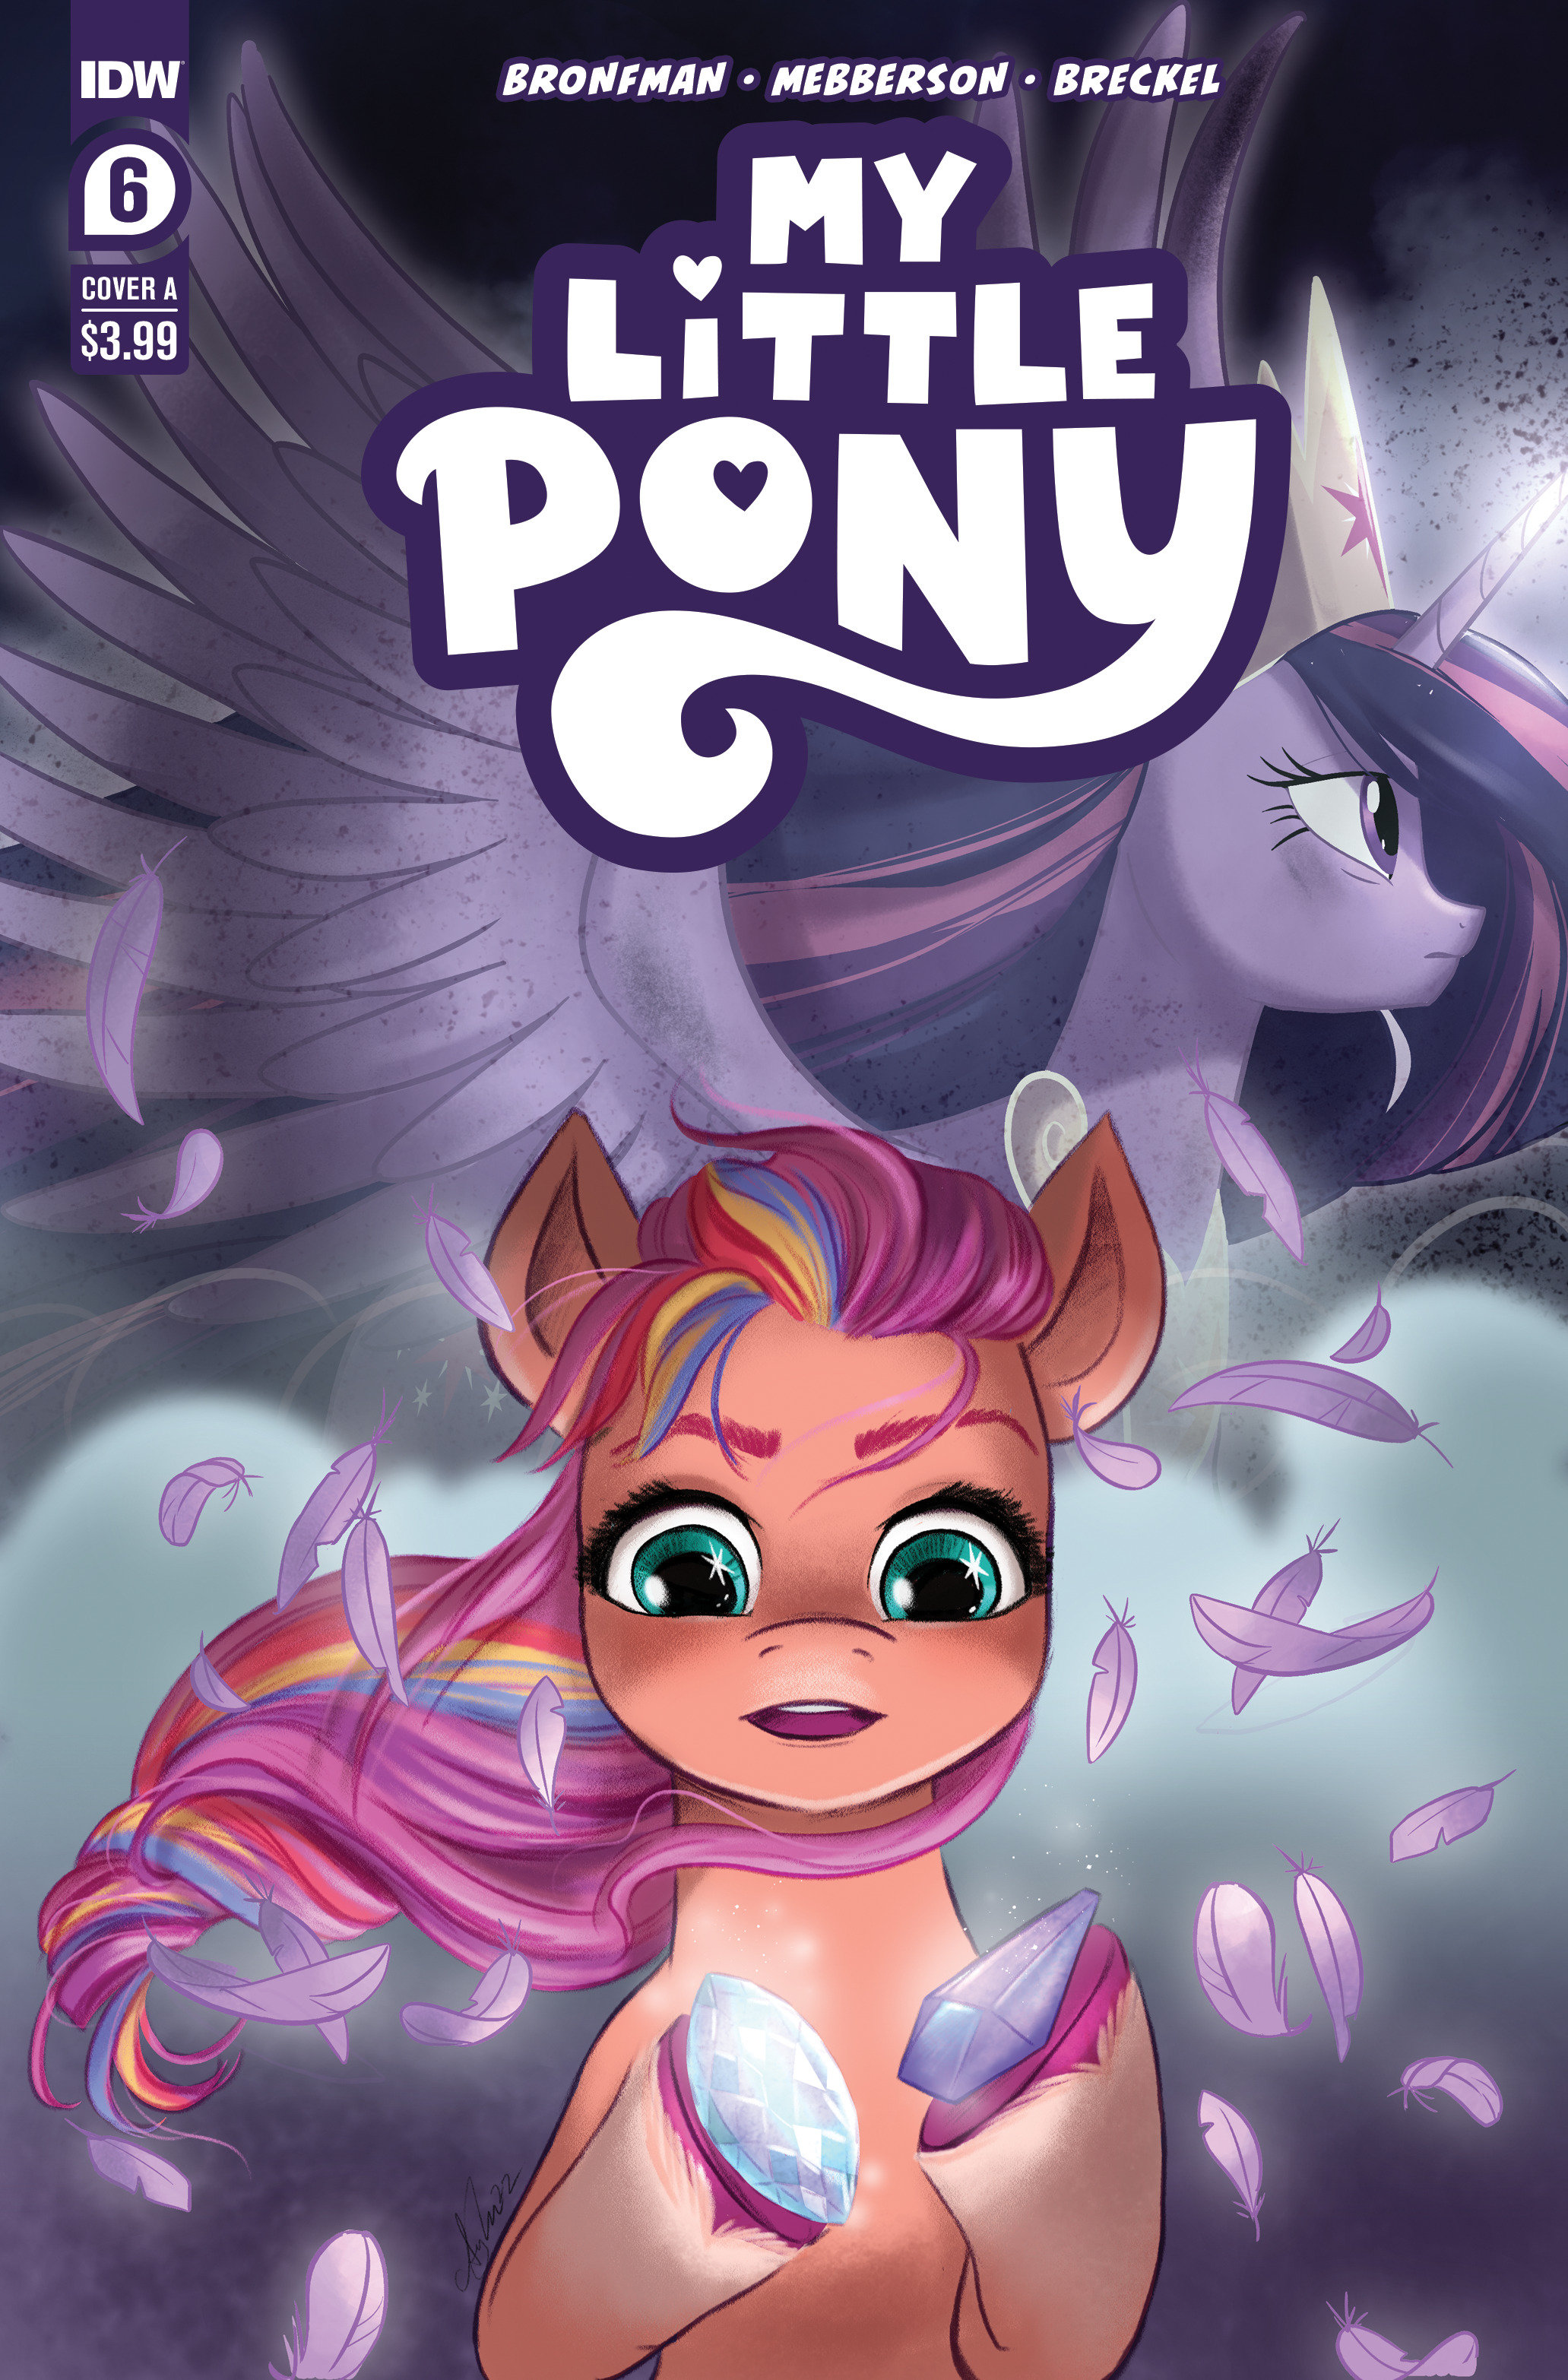 My Little Pony #6 Cover A